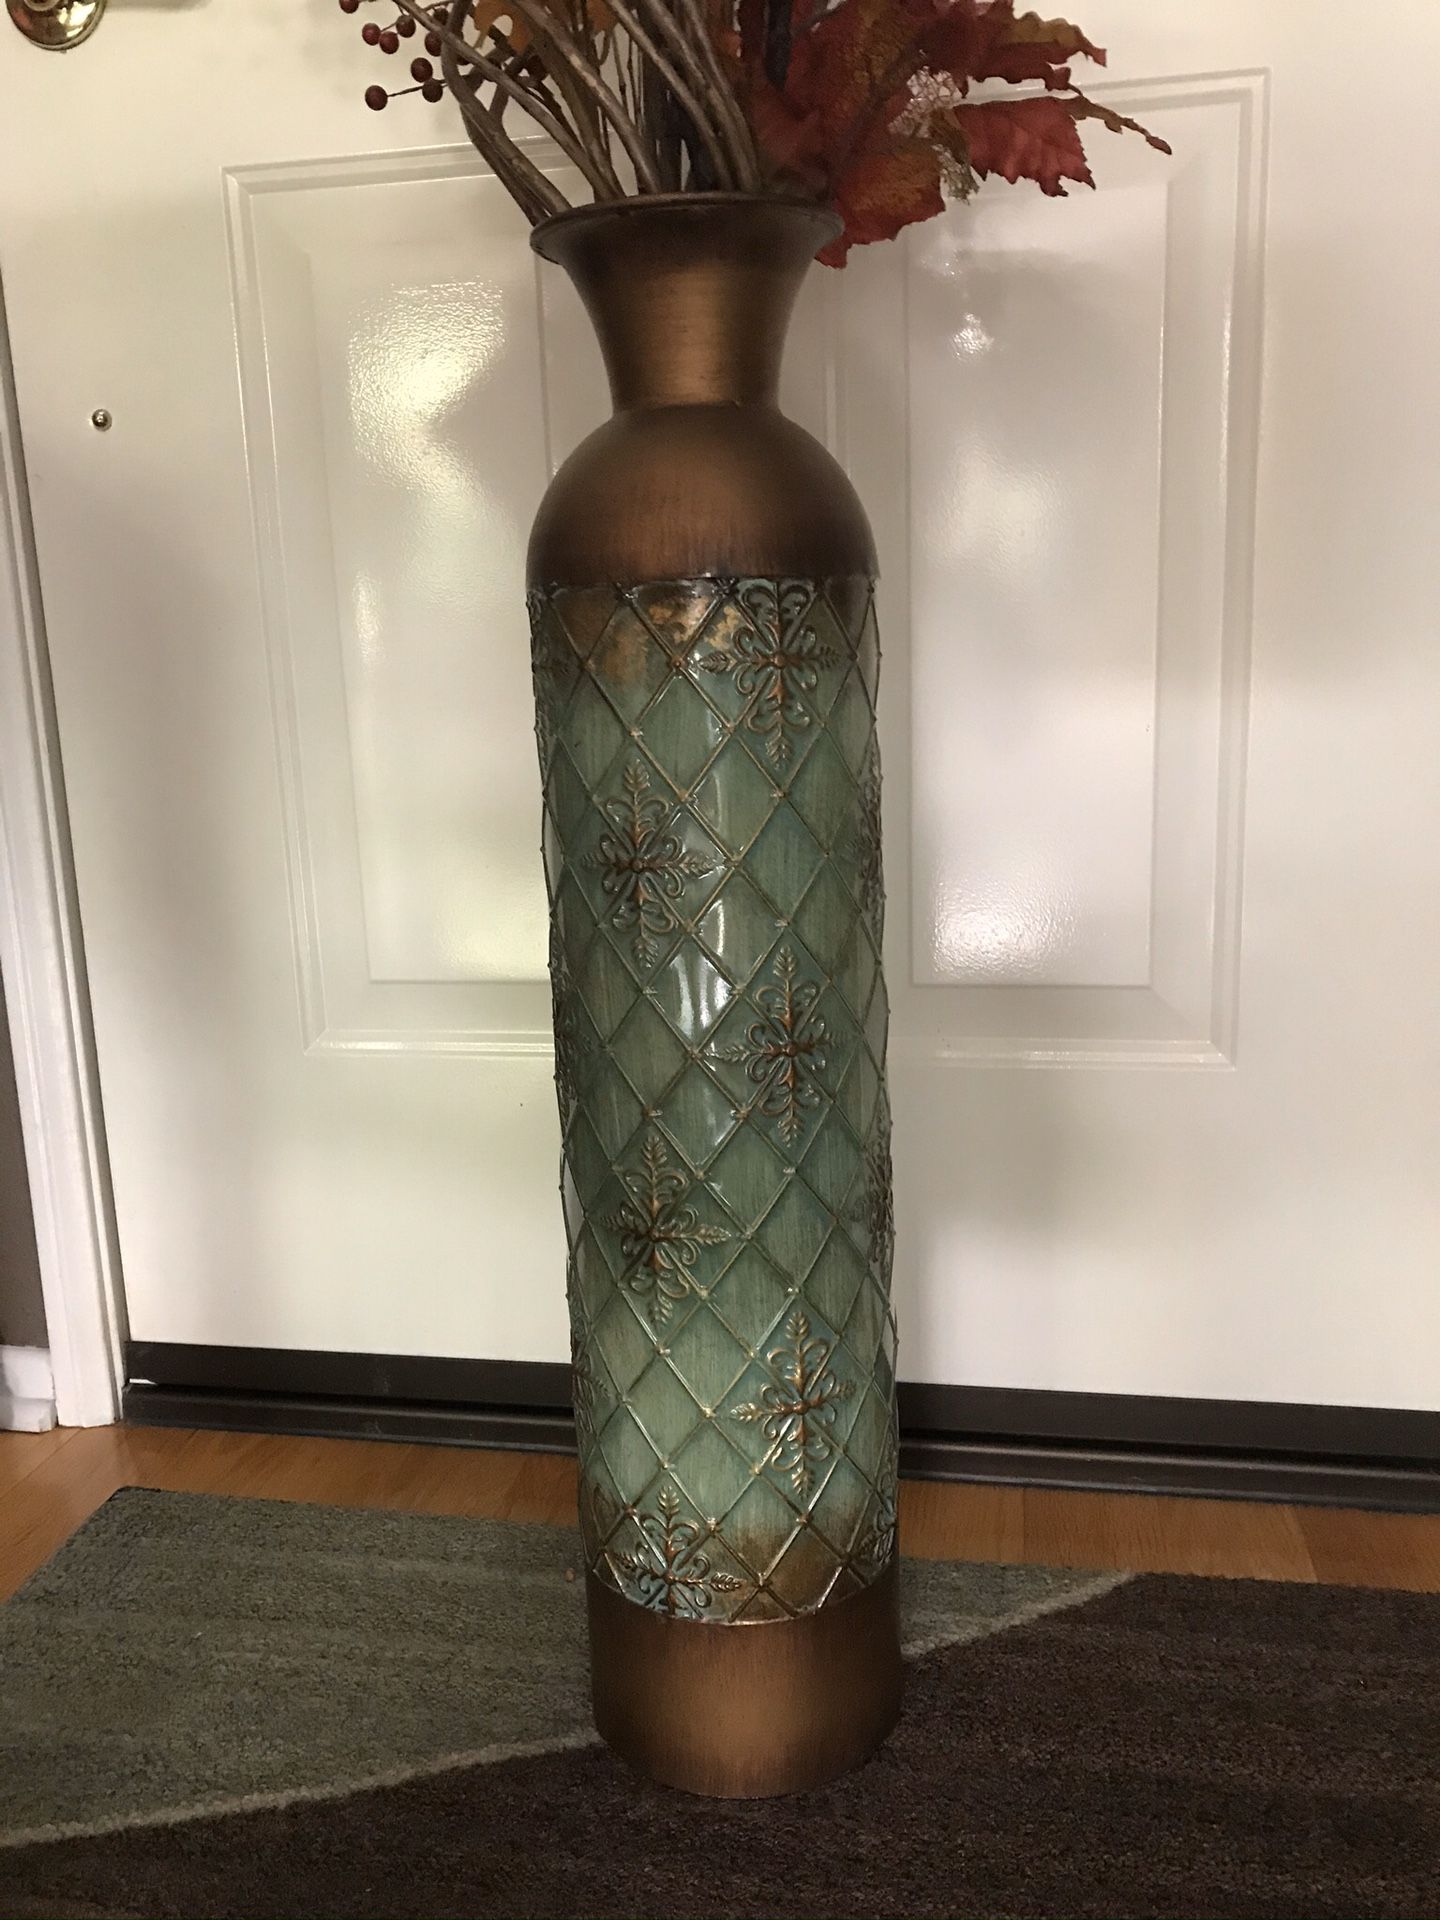 Tall Metal vase with twigs and fall foliage